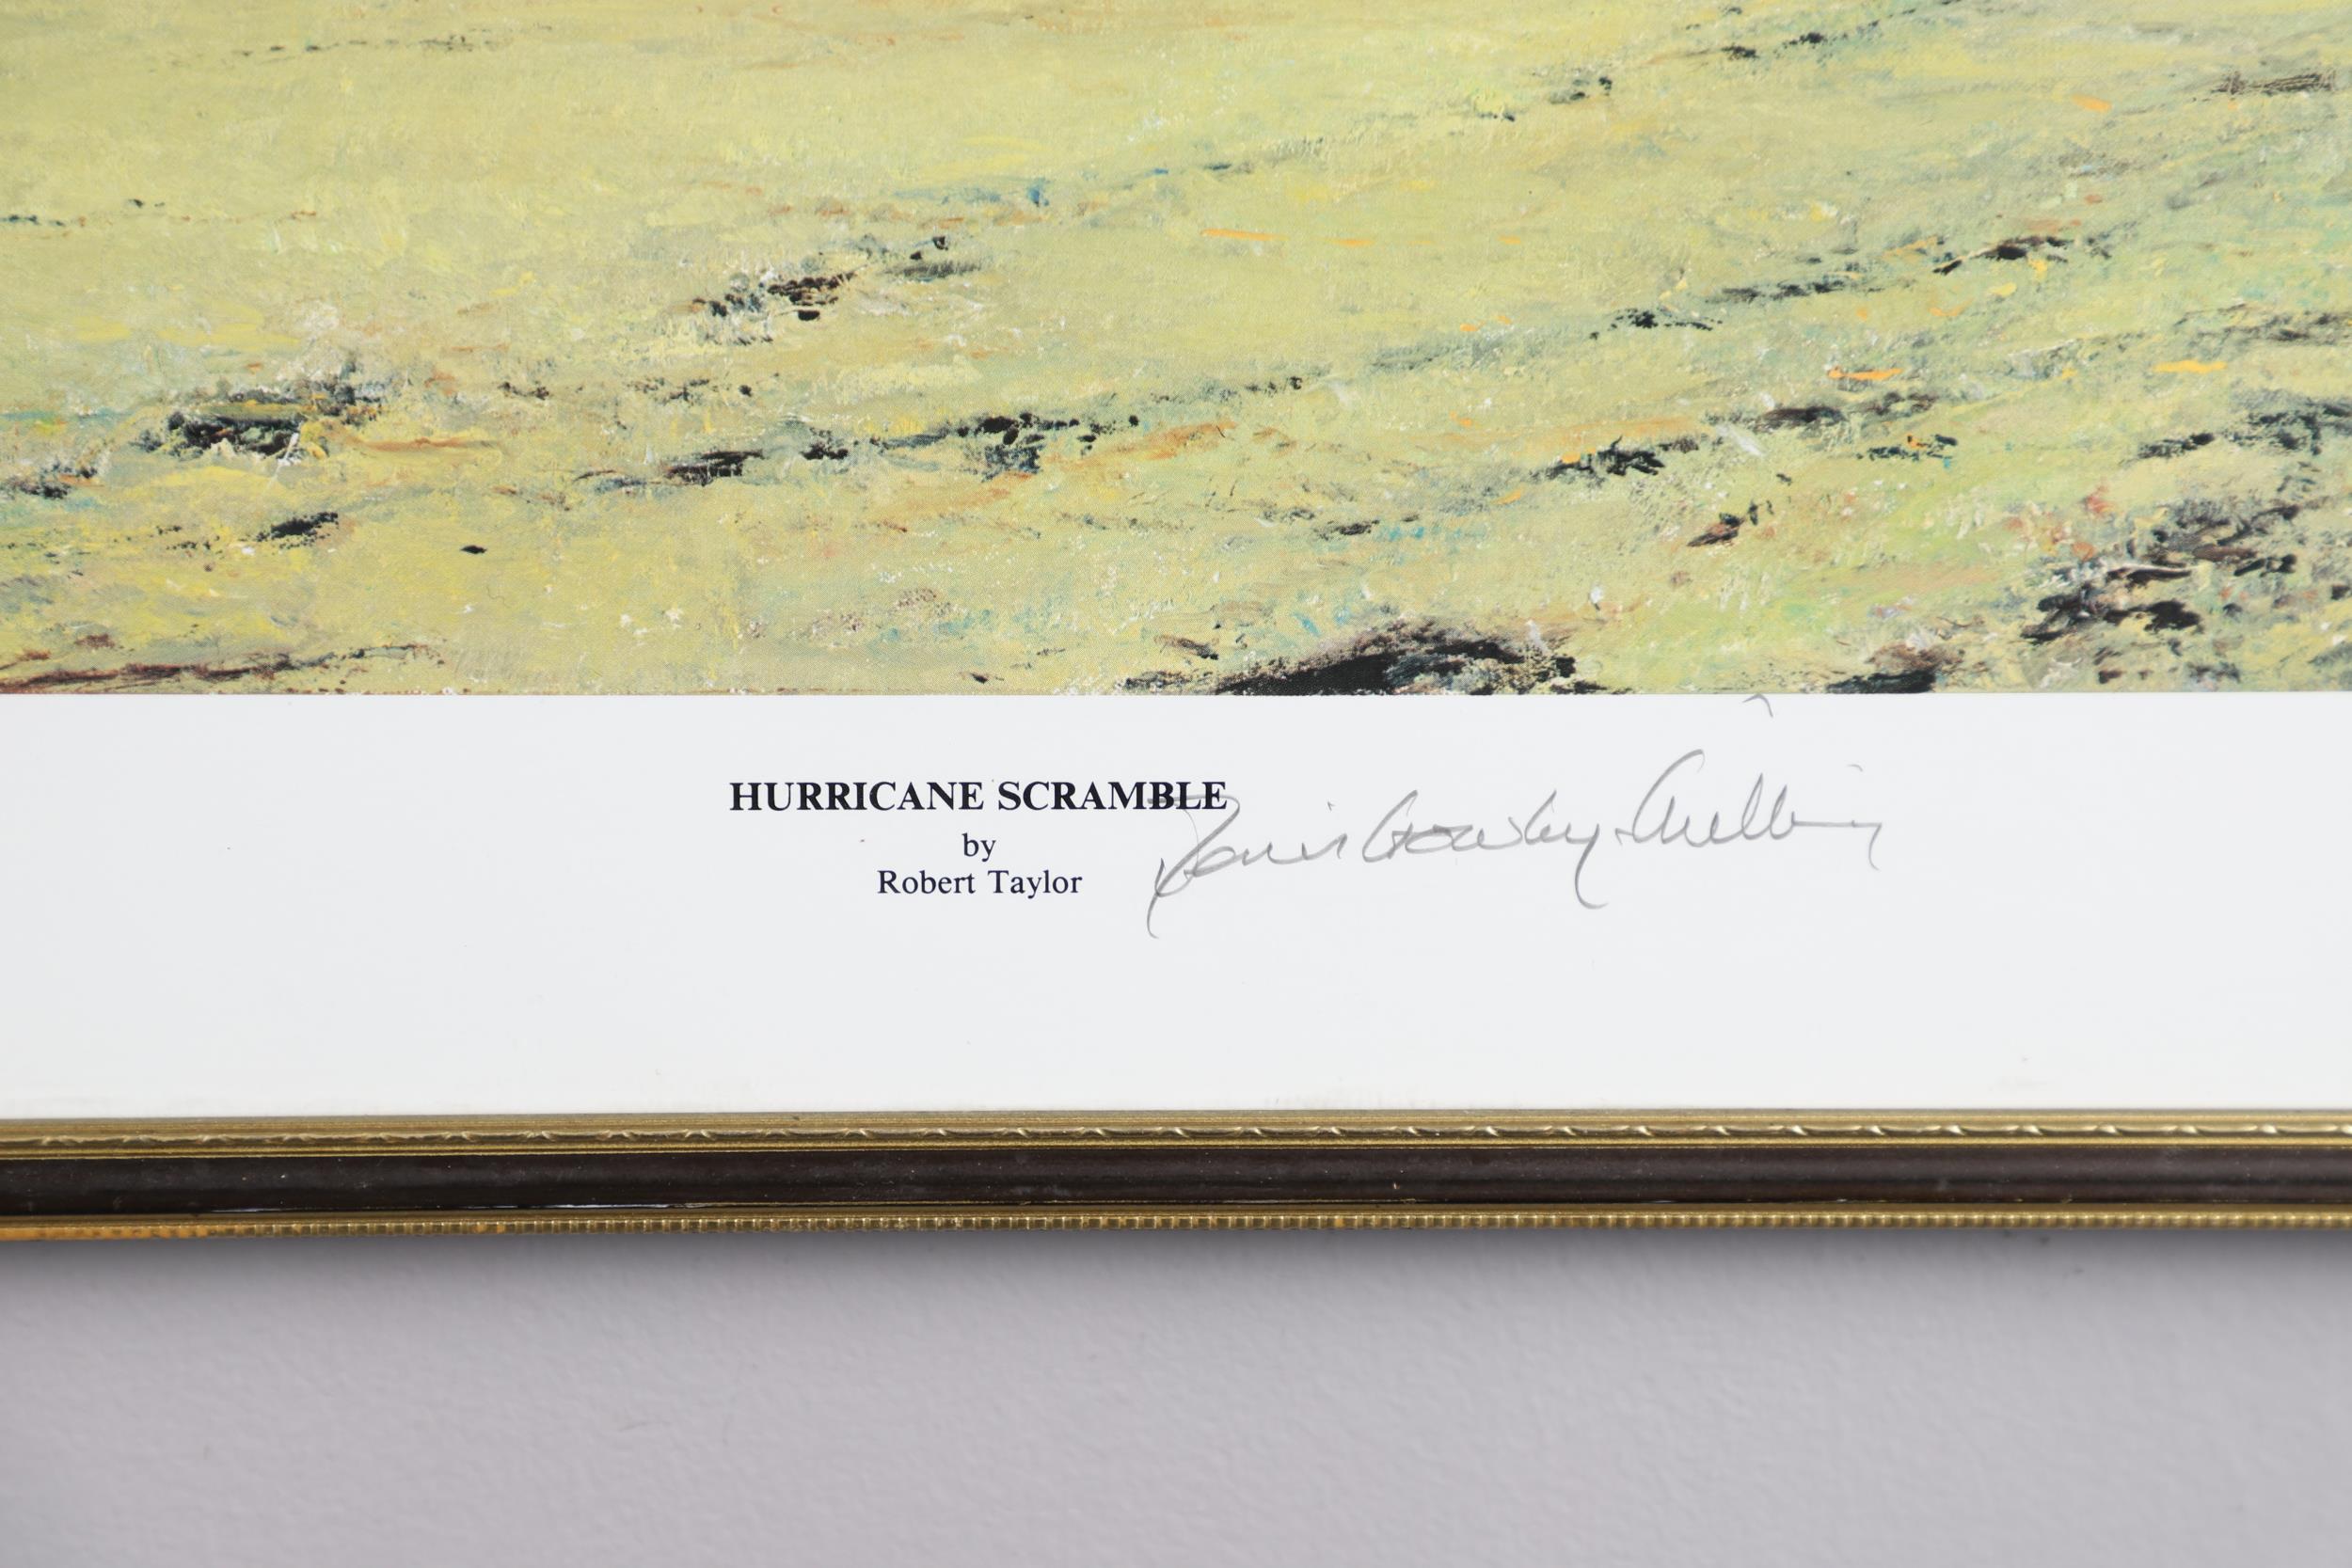 HURRICANE SCRAMBLE BY ROBERT TAYLOR, A COLOUR PRINT WITH PILOT'S SIGNATURES IN THE MARGIN. - Image 6 of 9